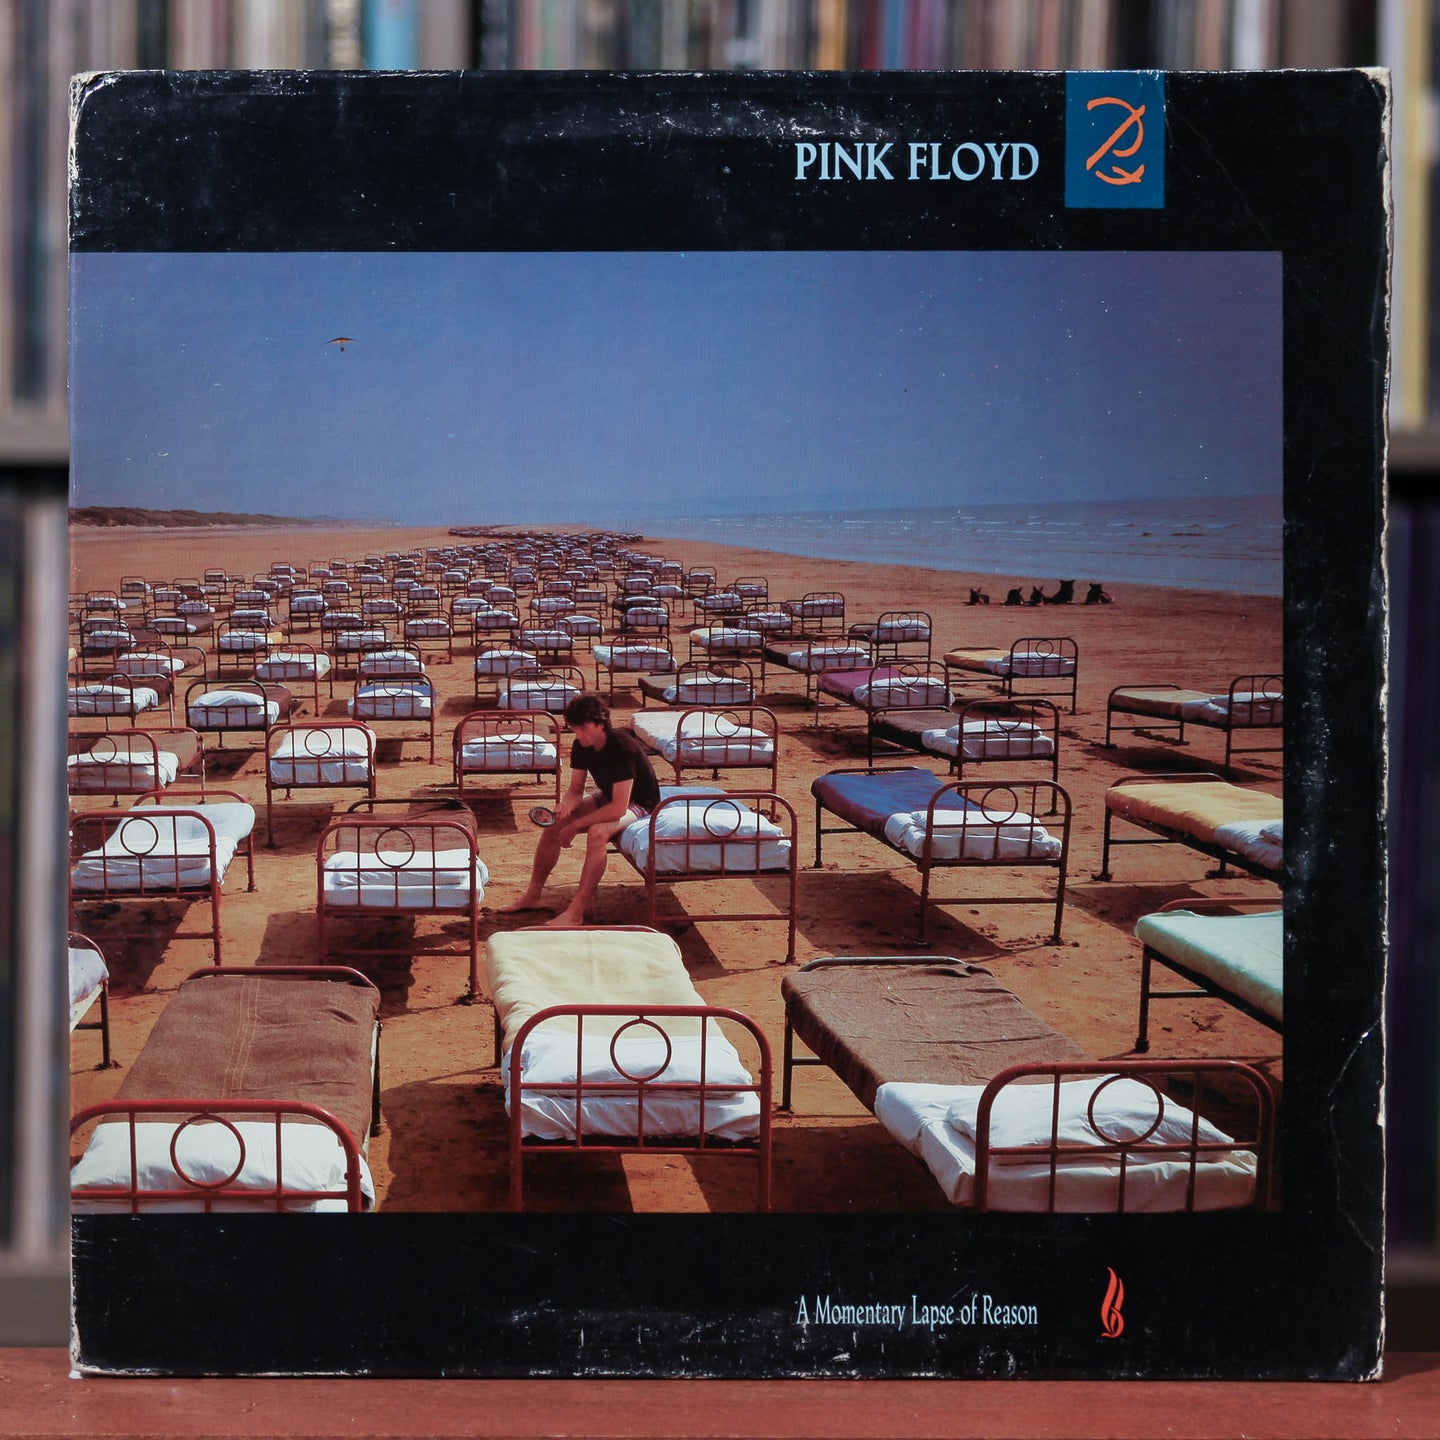 Pink Floyd - A Momentary Lapse Of Reason - 1987 Columbia, VG/VG